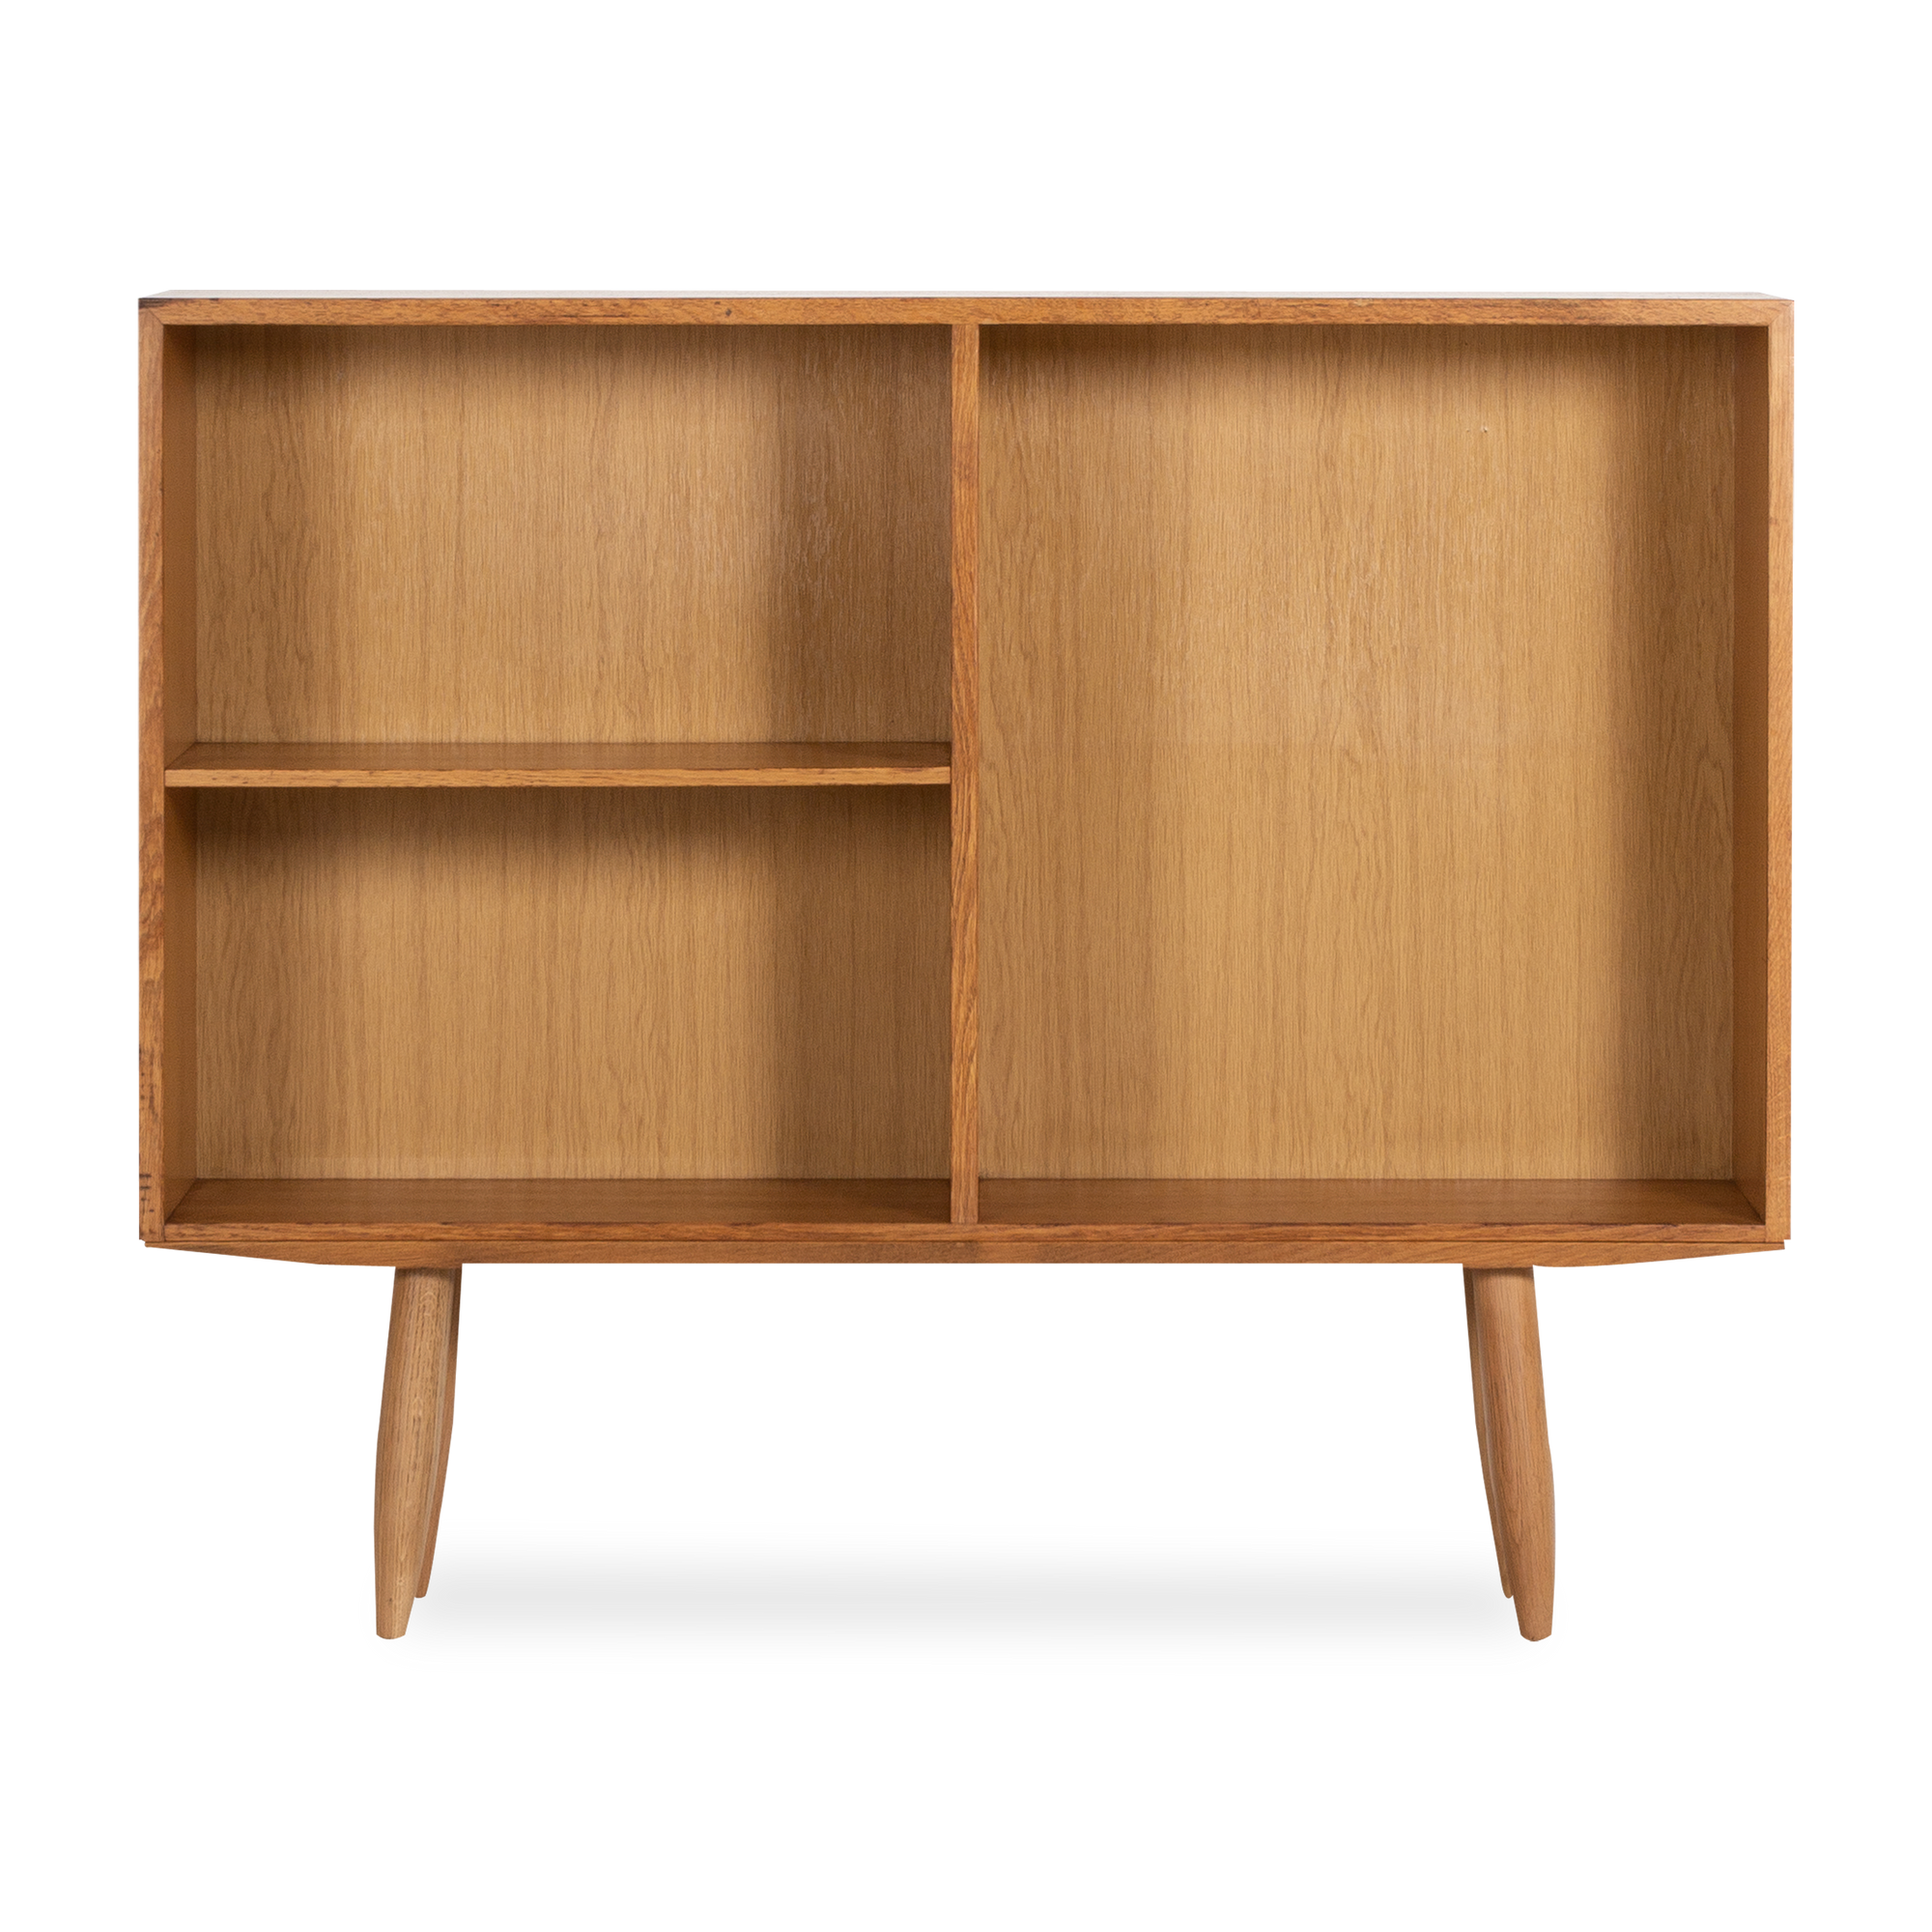 A beautiful display of rich aged rosewood, this vintage oak bookcase was manufactured in Denmark circa 1960s.